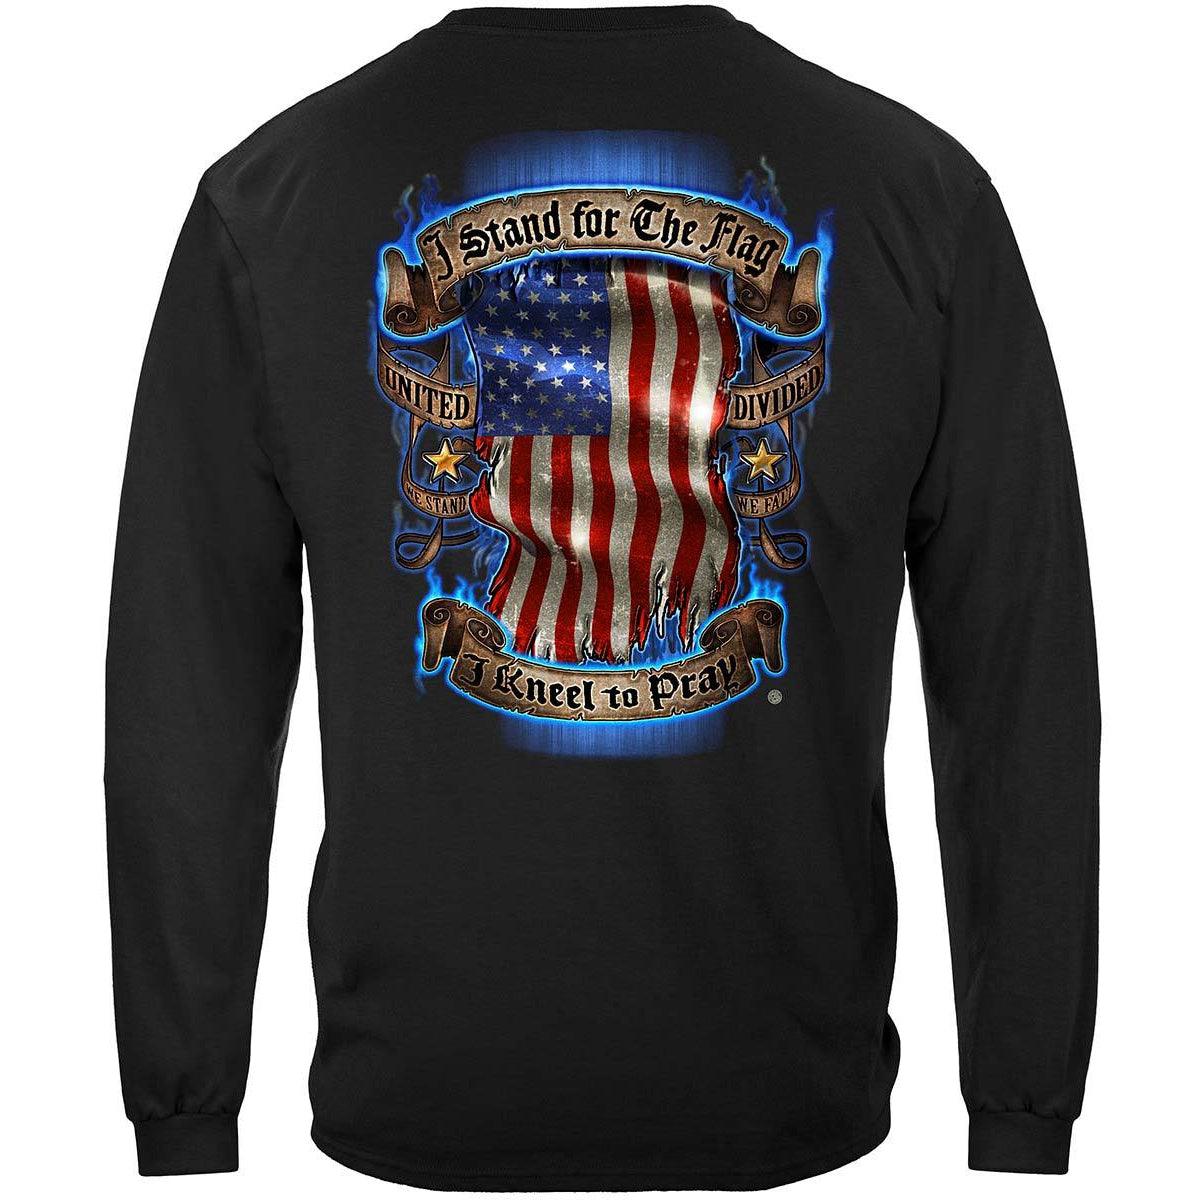 I Stand for the Flag - Kneel To Pray T-Shirt - Military Republic